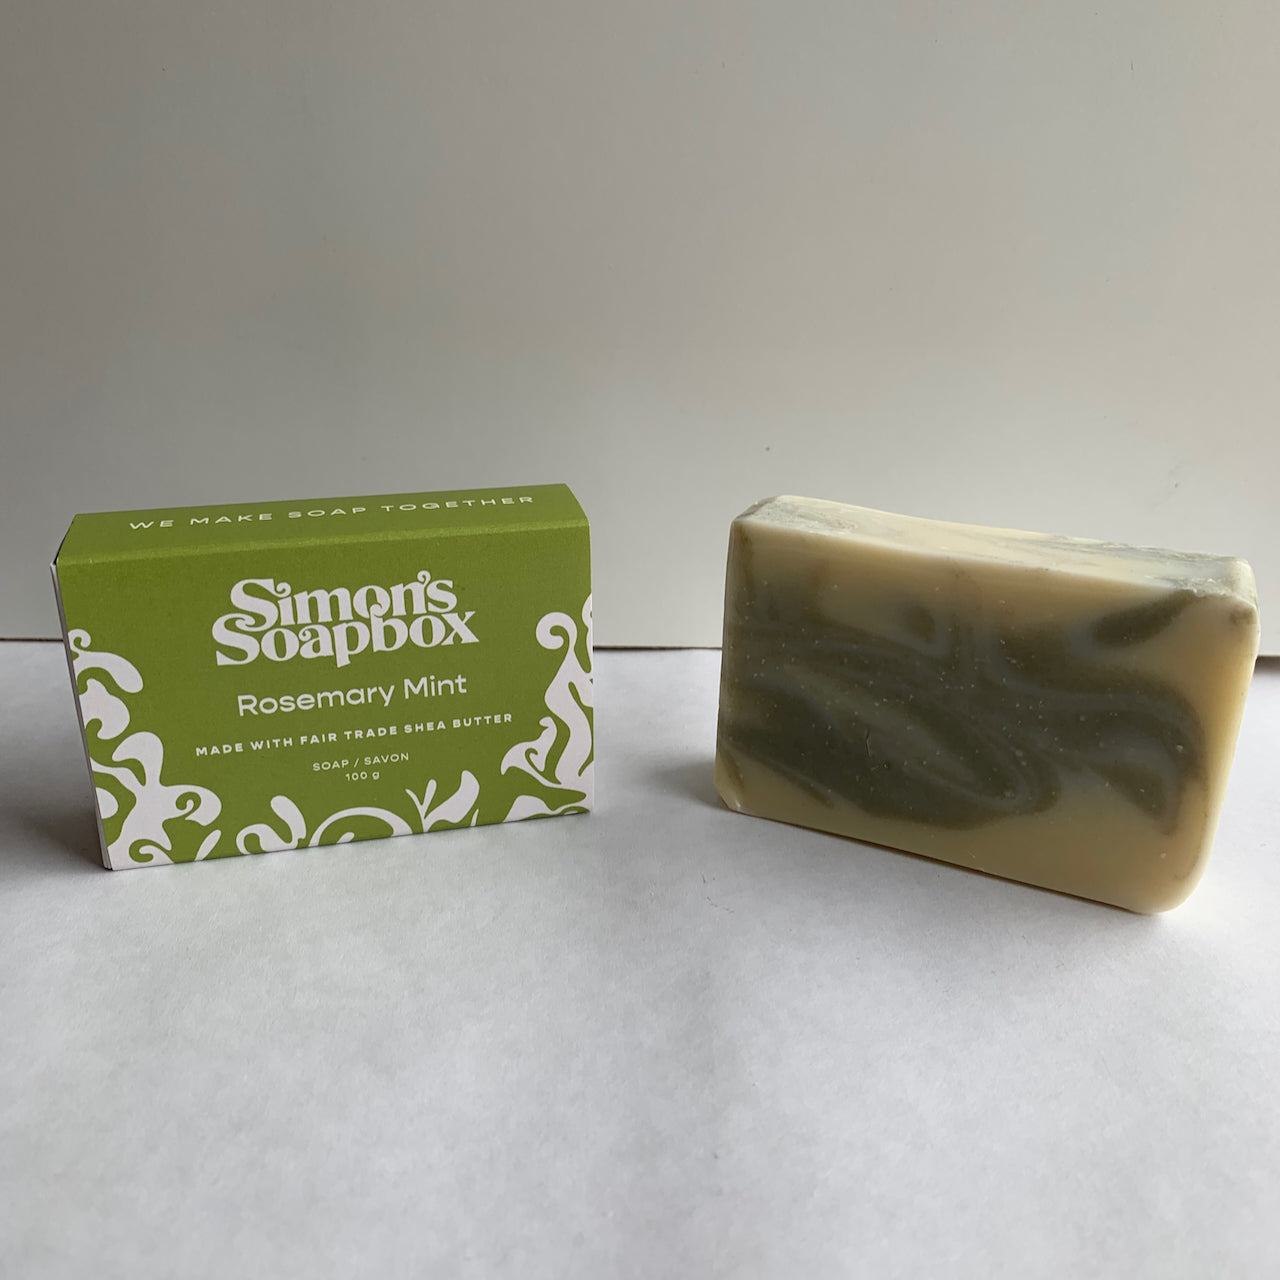 two bars of soap, one in a package and one unwrapped with a pale green swirl